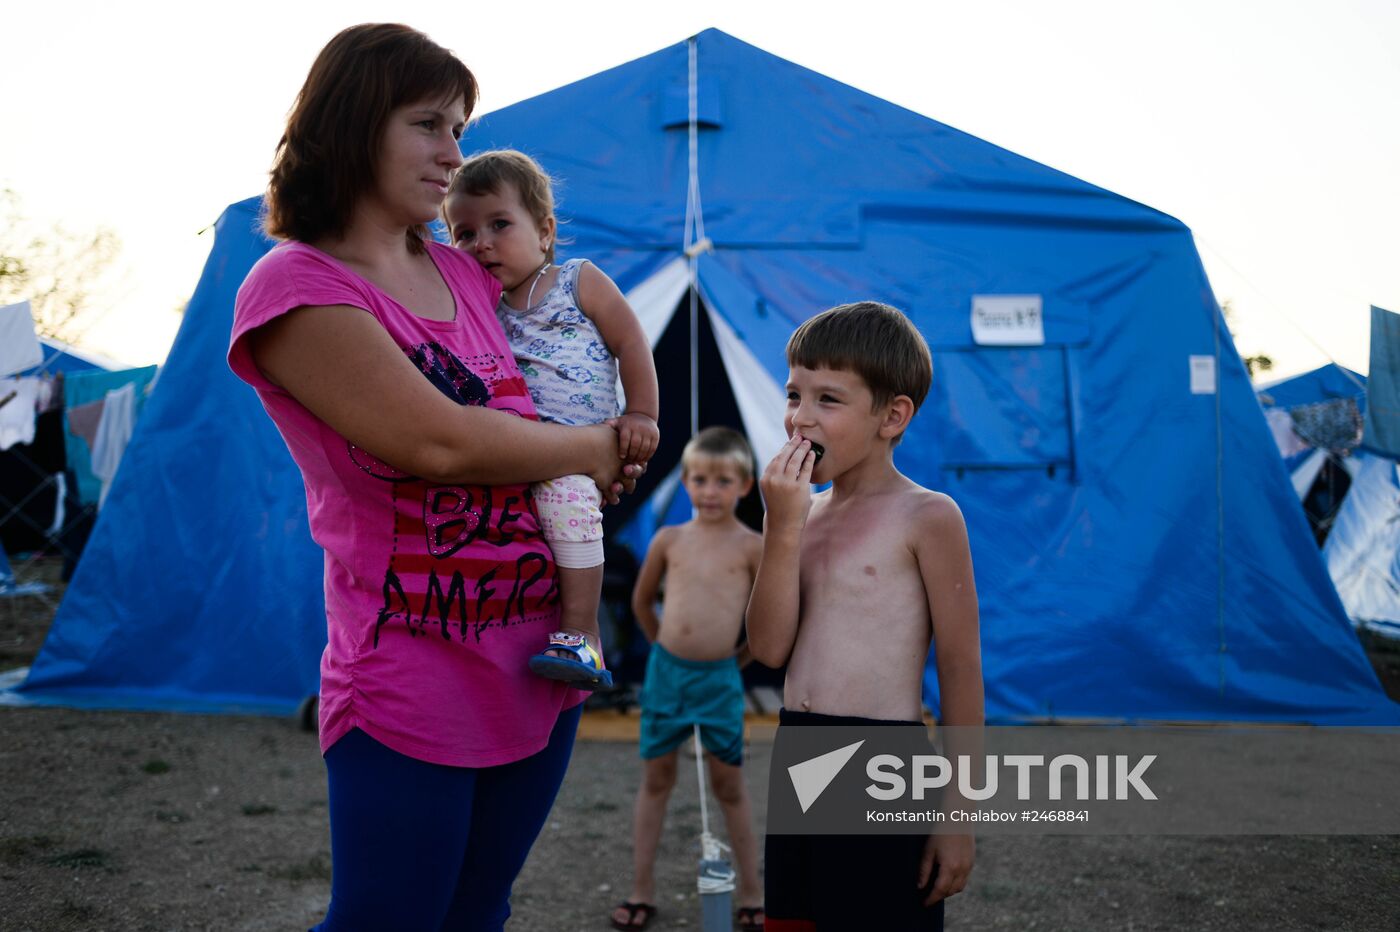 Camp with refugees from eastern Ukraine in Sevastopol